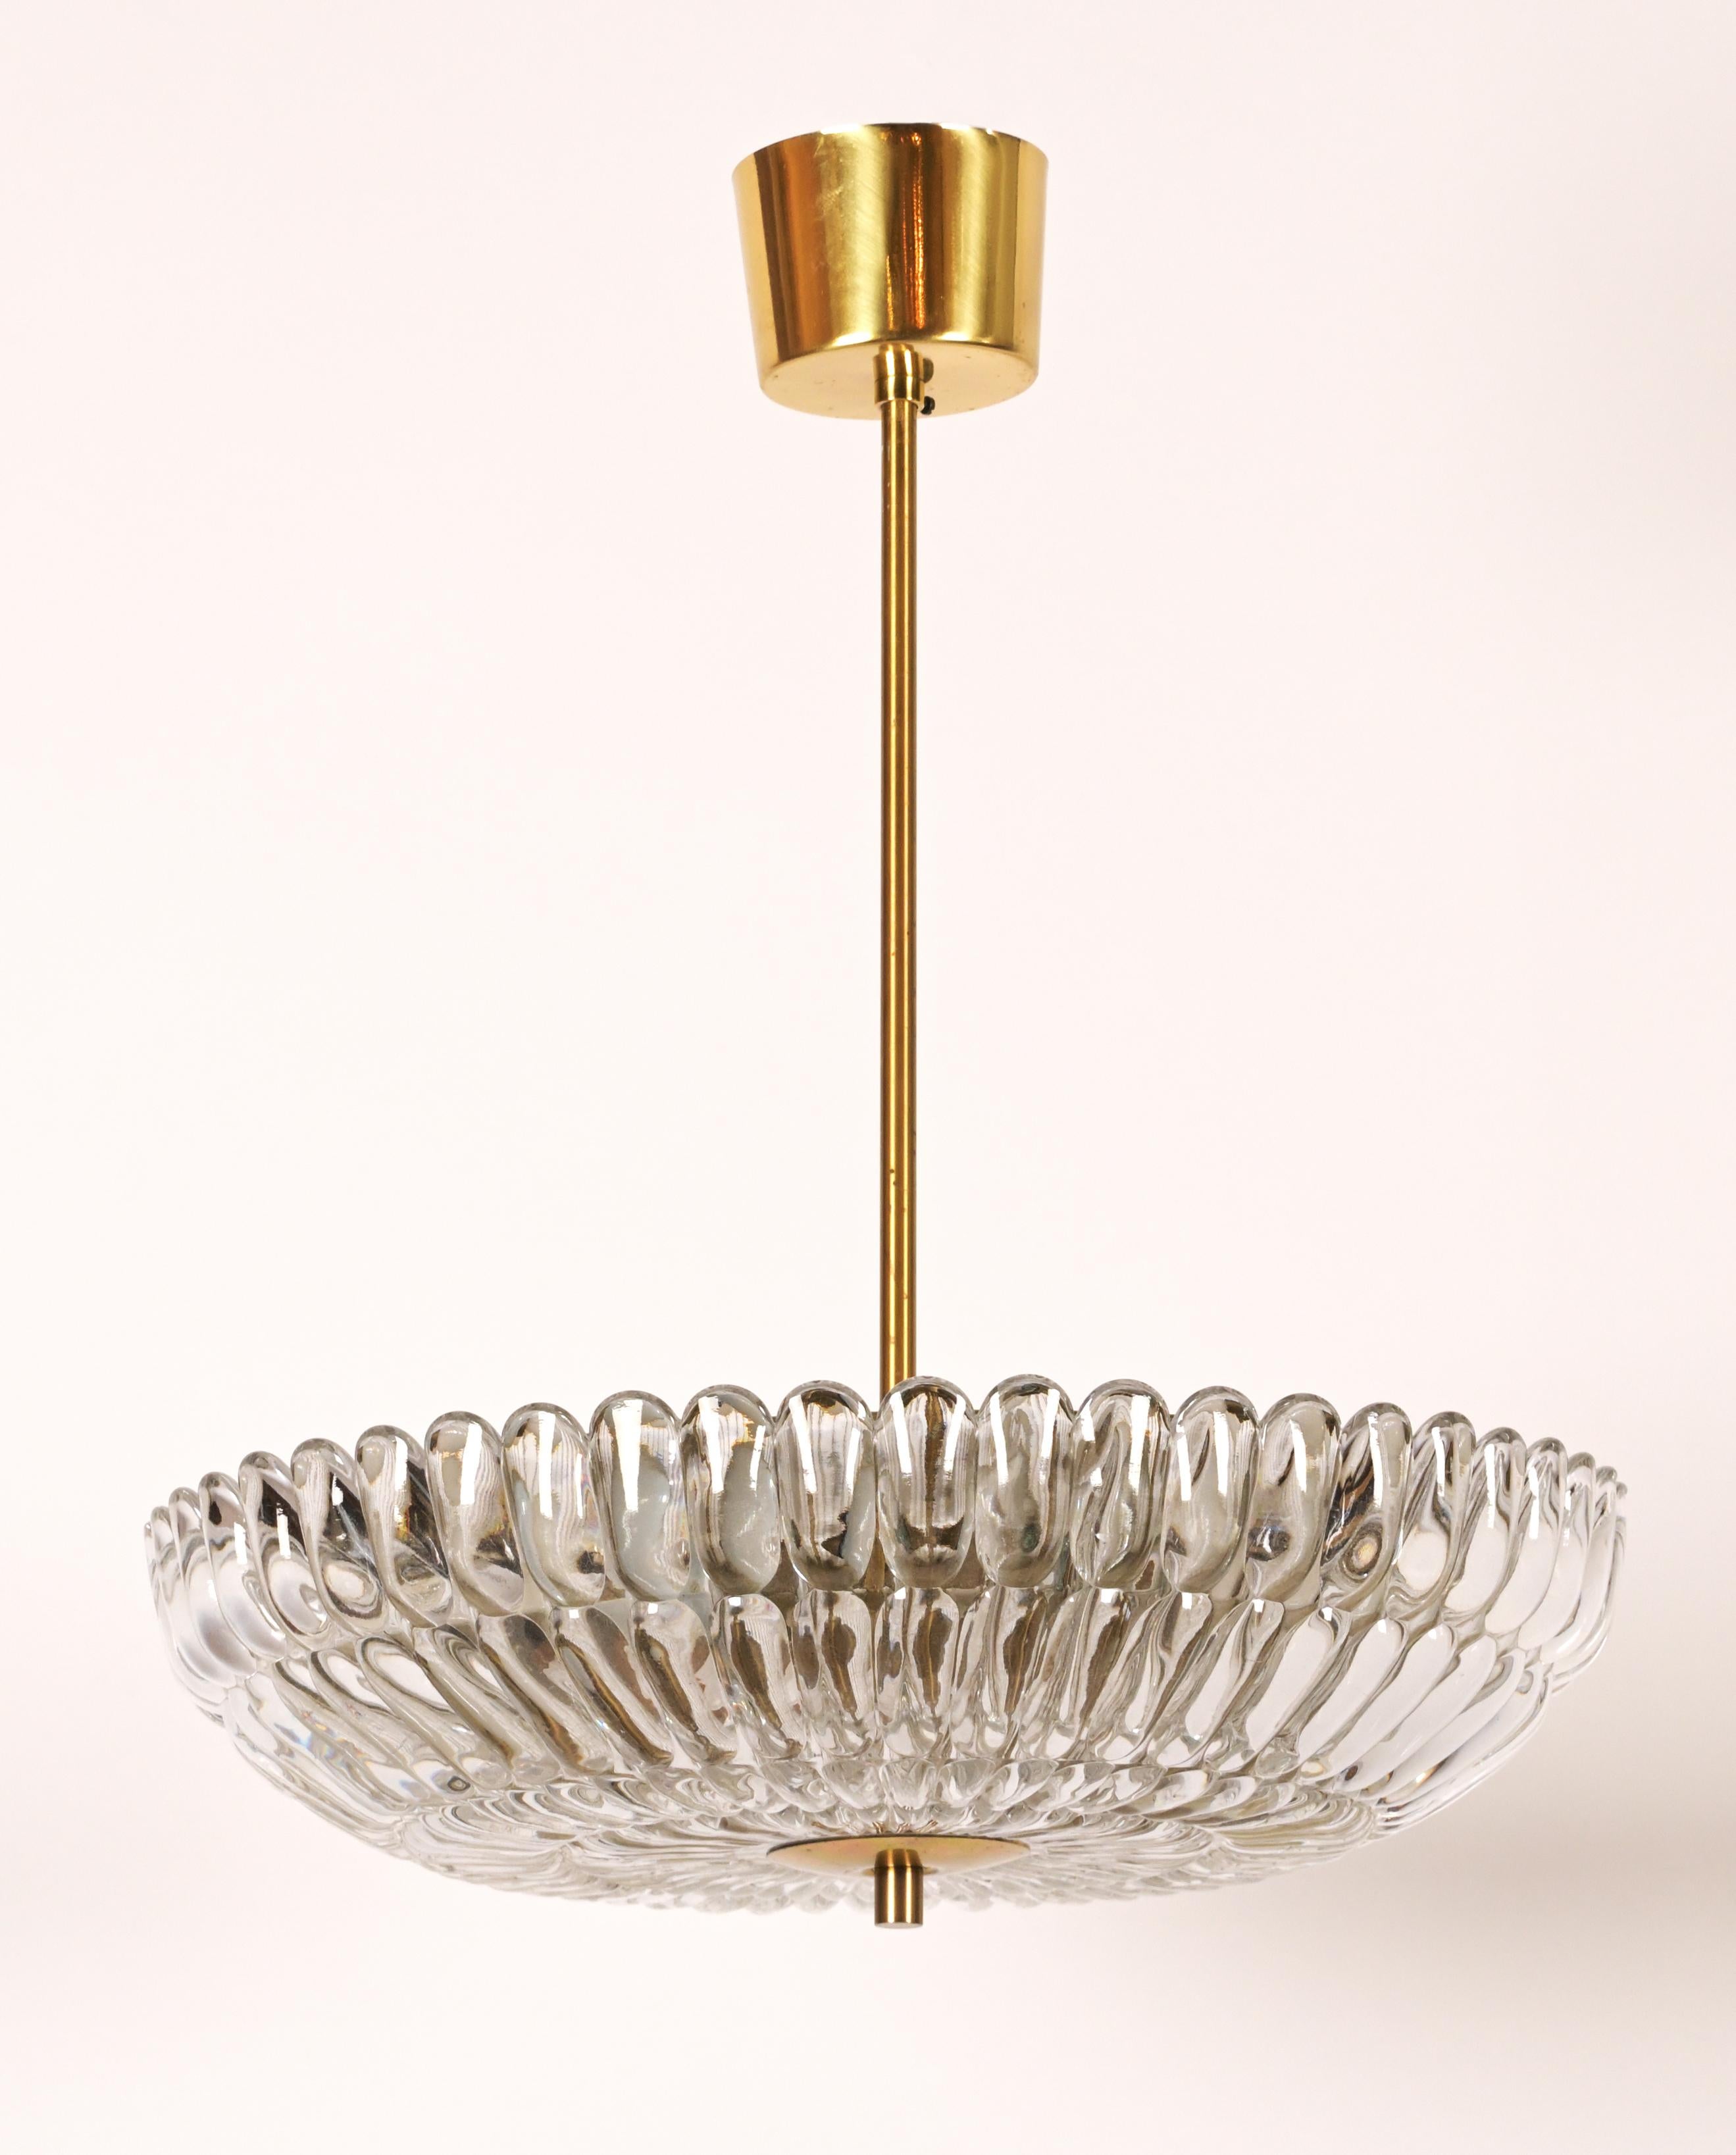 A Swedish Orrefors pendant designed by Carl Fagerlund (1915-2011) A light spun brass frame having over-scaled nail head motif crystal concealing three electric candelabra sockets. The underside with texture glass diffuser secured by finial. The